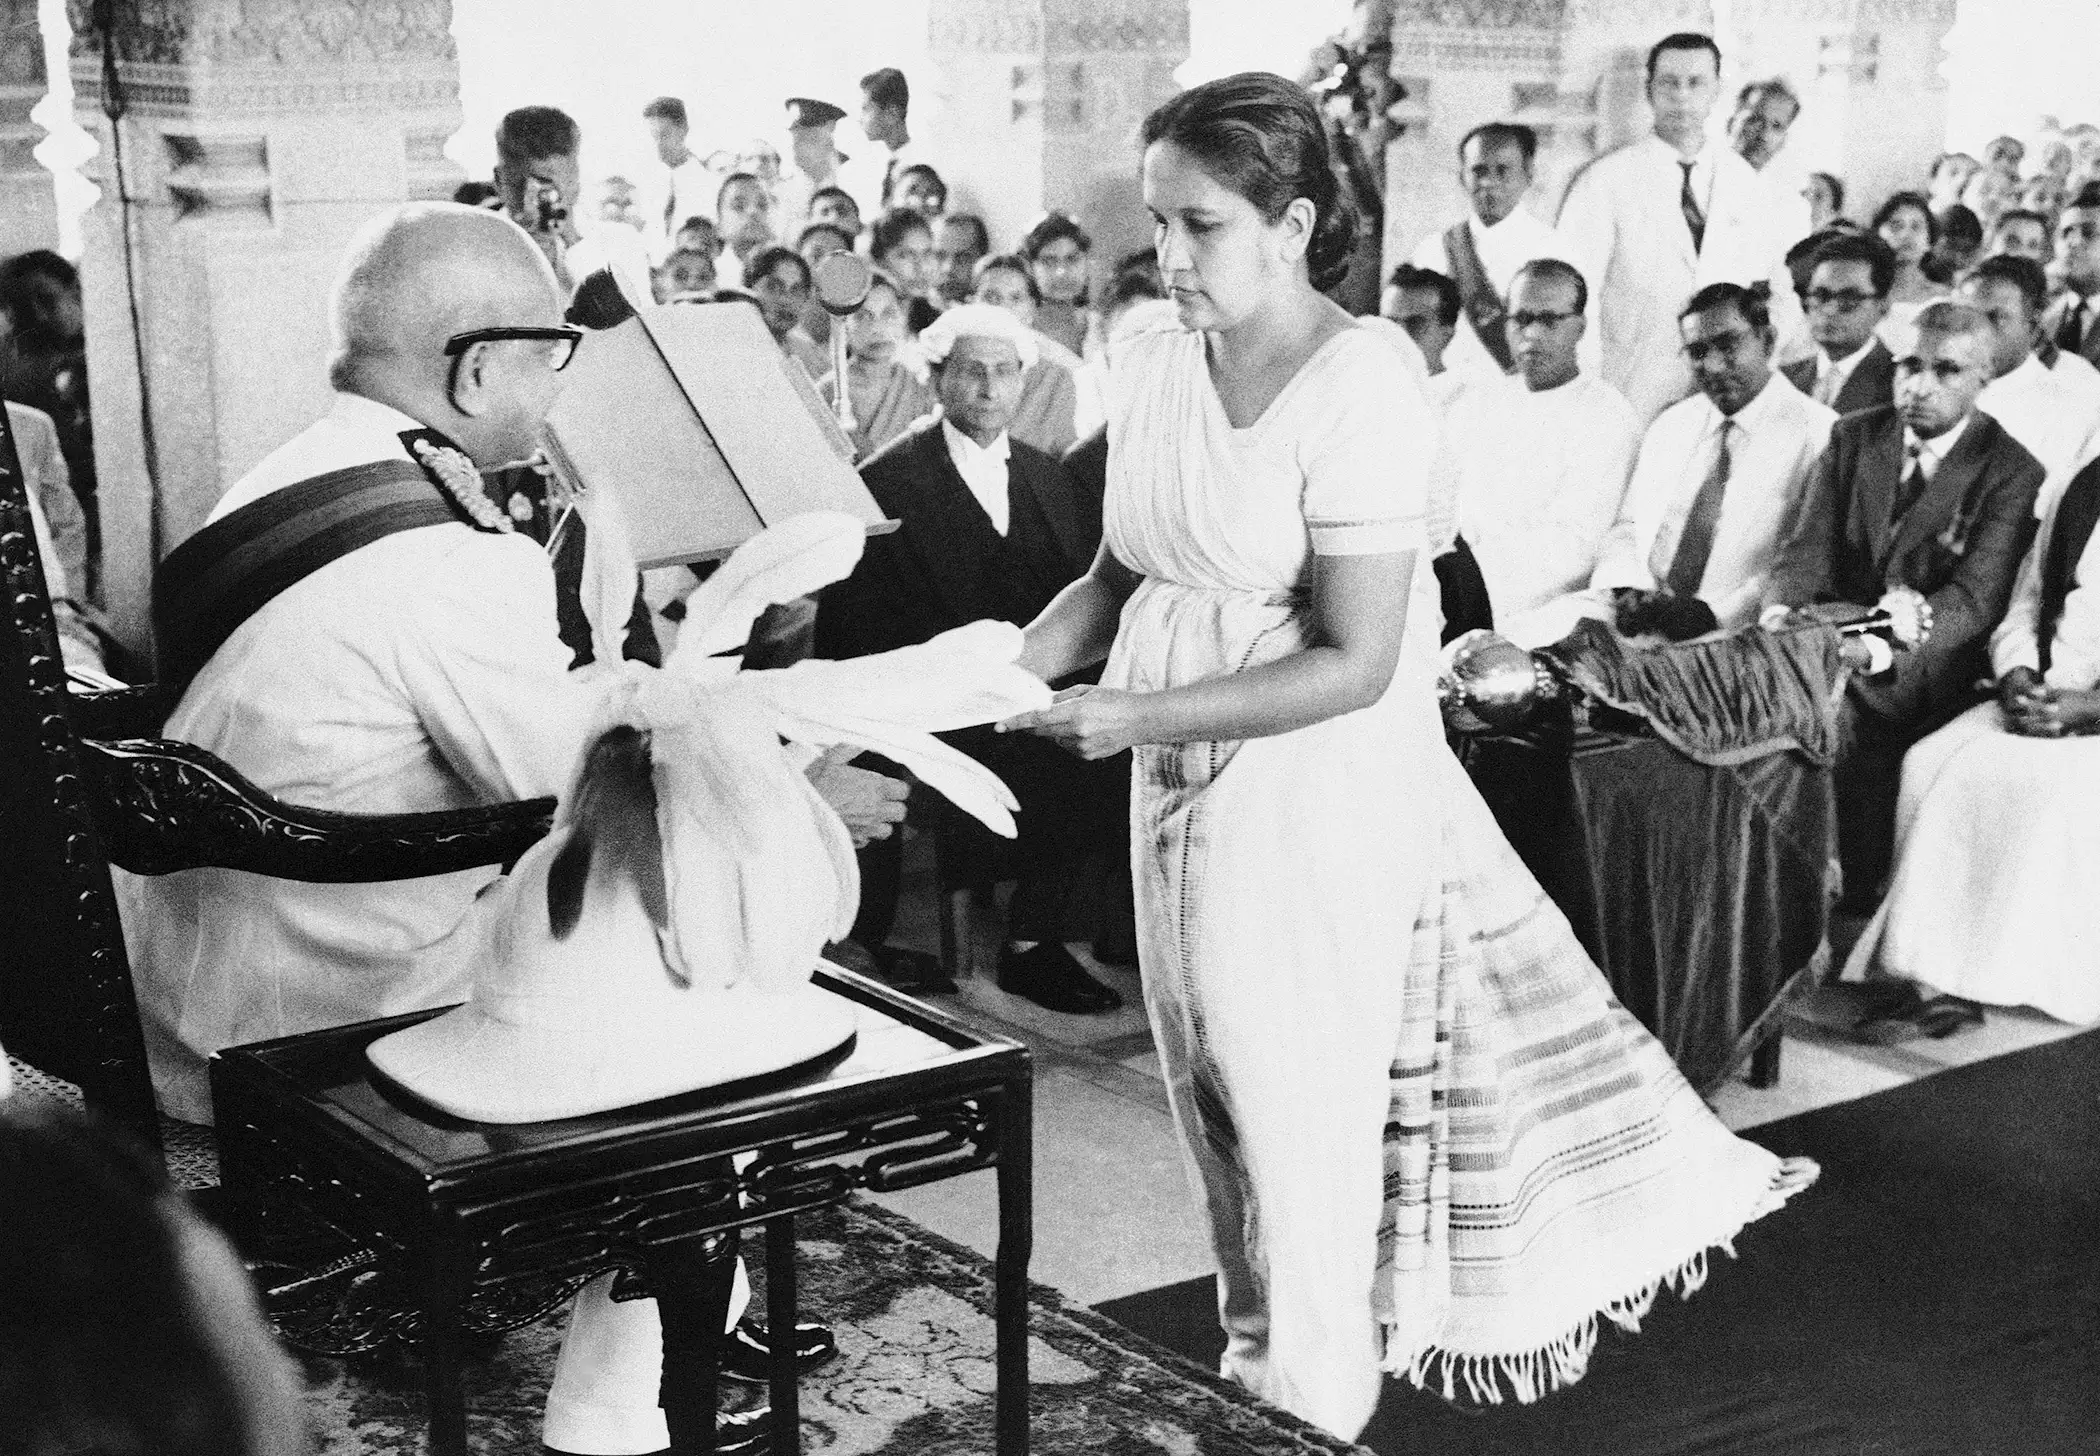 The Prime Minister of Ceylon, Mrs. Sirimavo Bandaranaike, hands over a copy of the throne speech to Sir Oliver Goonetilleke, the Governor General of Ceylon, at the ceremonial inauguration of the New Ceylon Parliament in Colombo on August 12, 1960. In the centre background wearing a wig and gown, is Ralph Deraniyagala clerk of the Ceylon House of Representatives. At right are (left to right) T.B. Ilangaratne the minister of trade: Felix Dias Bandaranaike minister of finance: and Dudley Senanayake, leader of the opposition (wearing a dark suit).